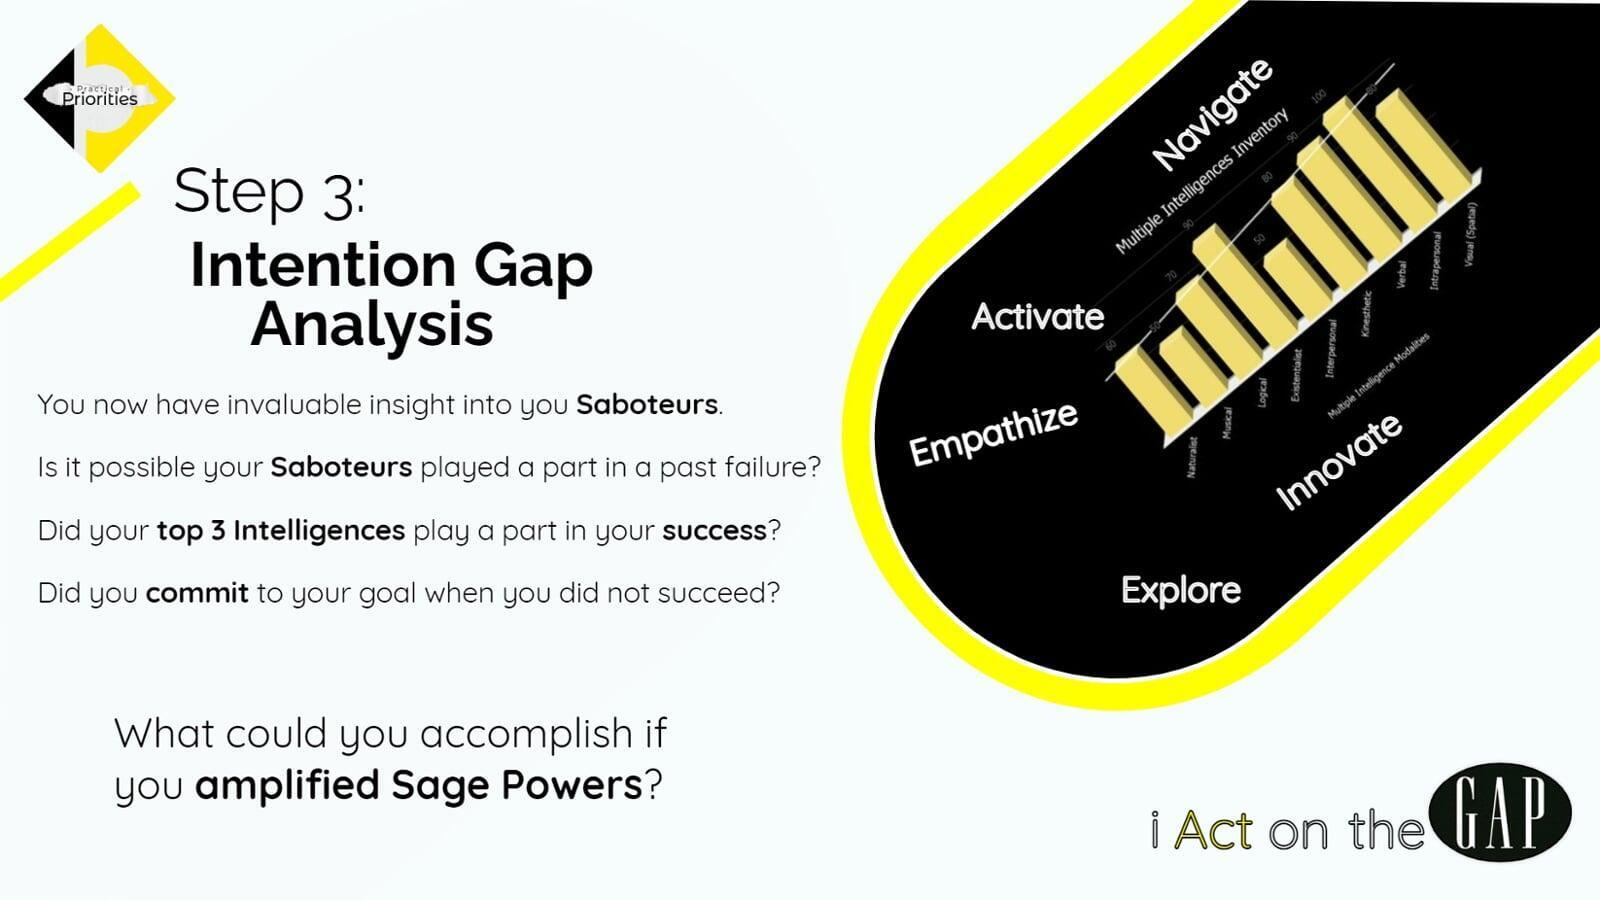 Intention Gap Analysis. Step 3 to Amplify Potential - M.I. Excel and Sage Powers